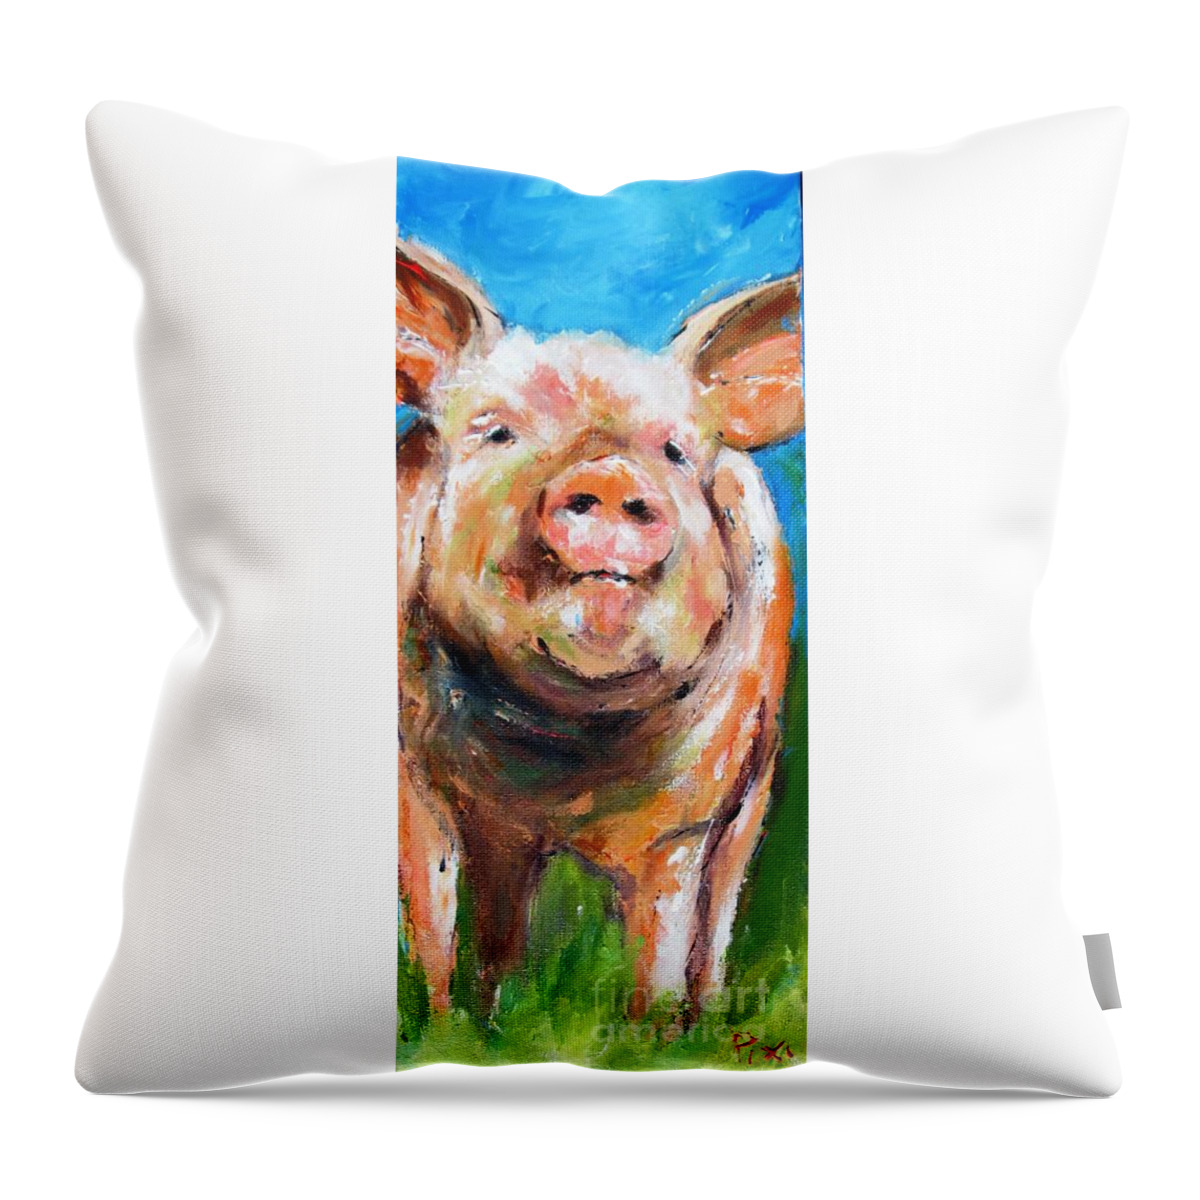 Piggy Throw Pillow featuring the painting Happy piggy paintings by Mary Cahalan Lee - aka PIXI